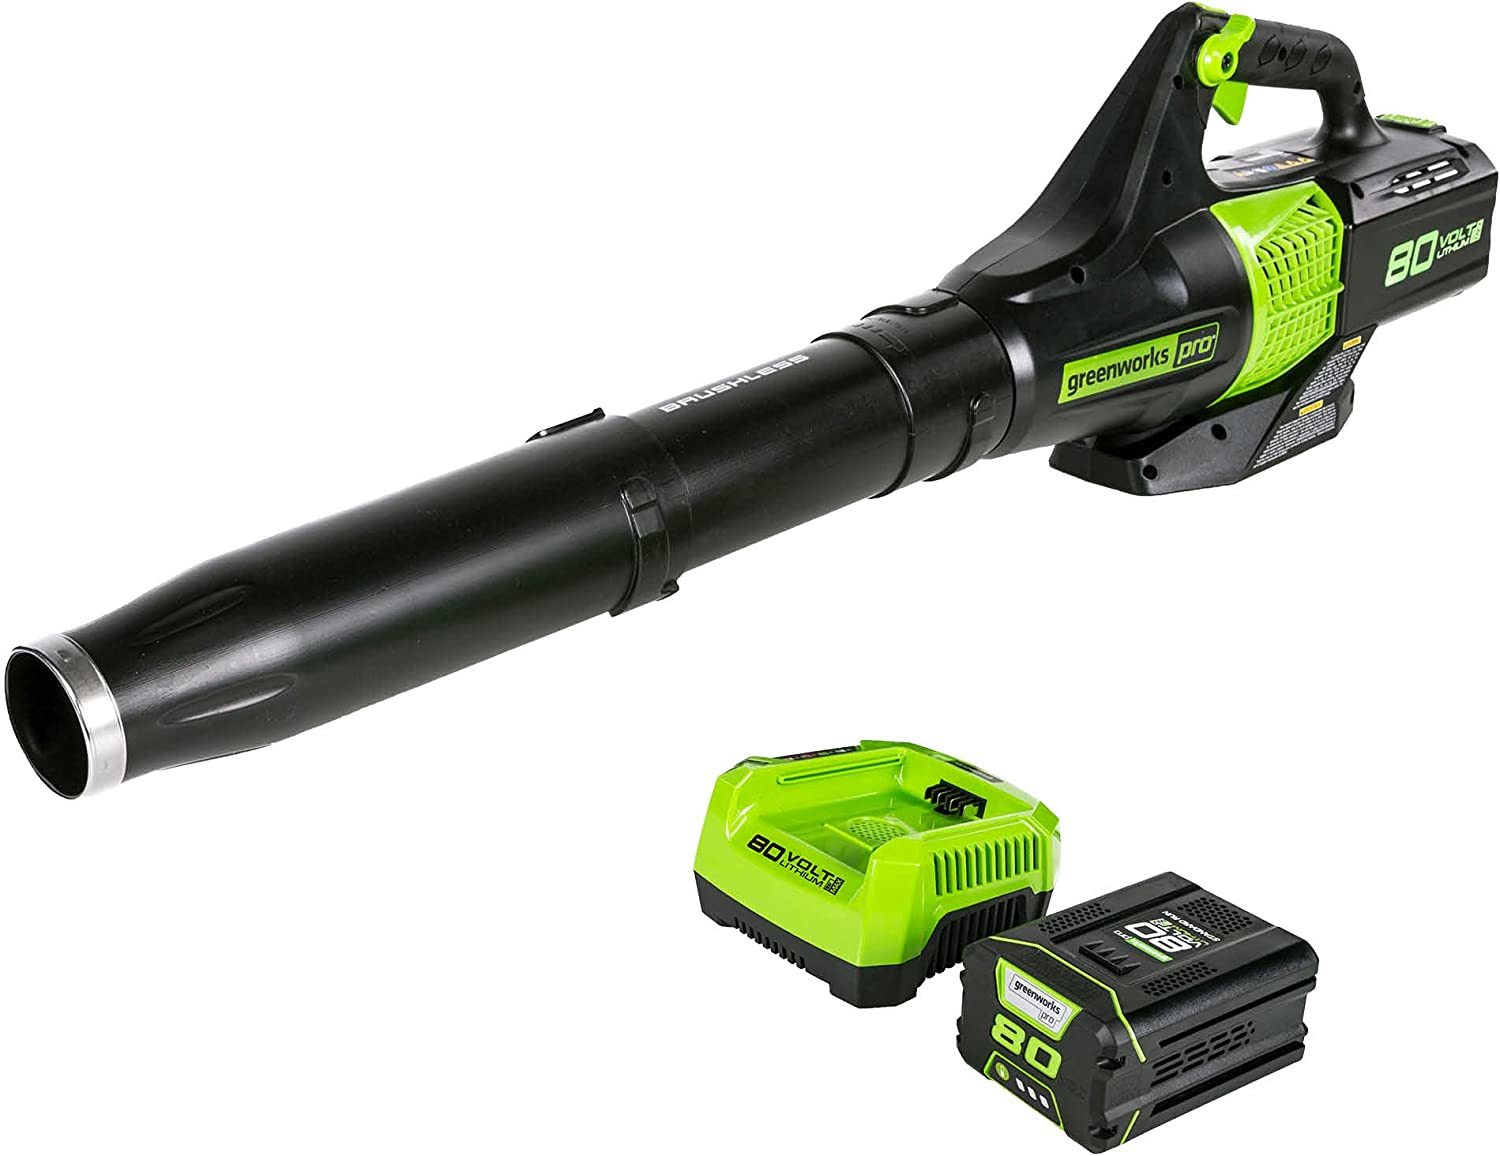 Powersmart 40V Cordless Handheld Turbo Blower with 4.0Ah Battery and Charger Ps76220a